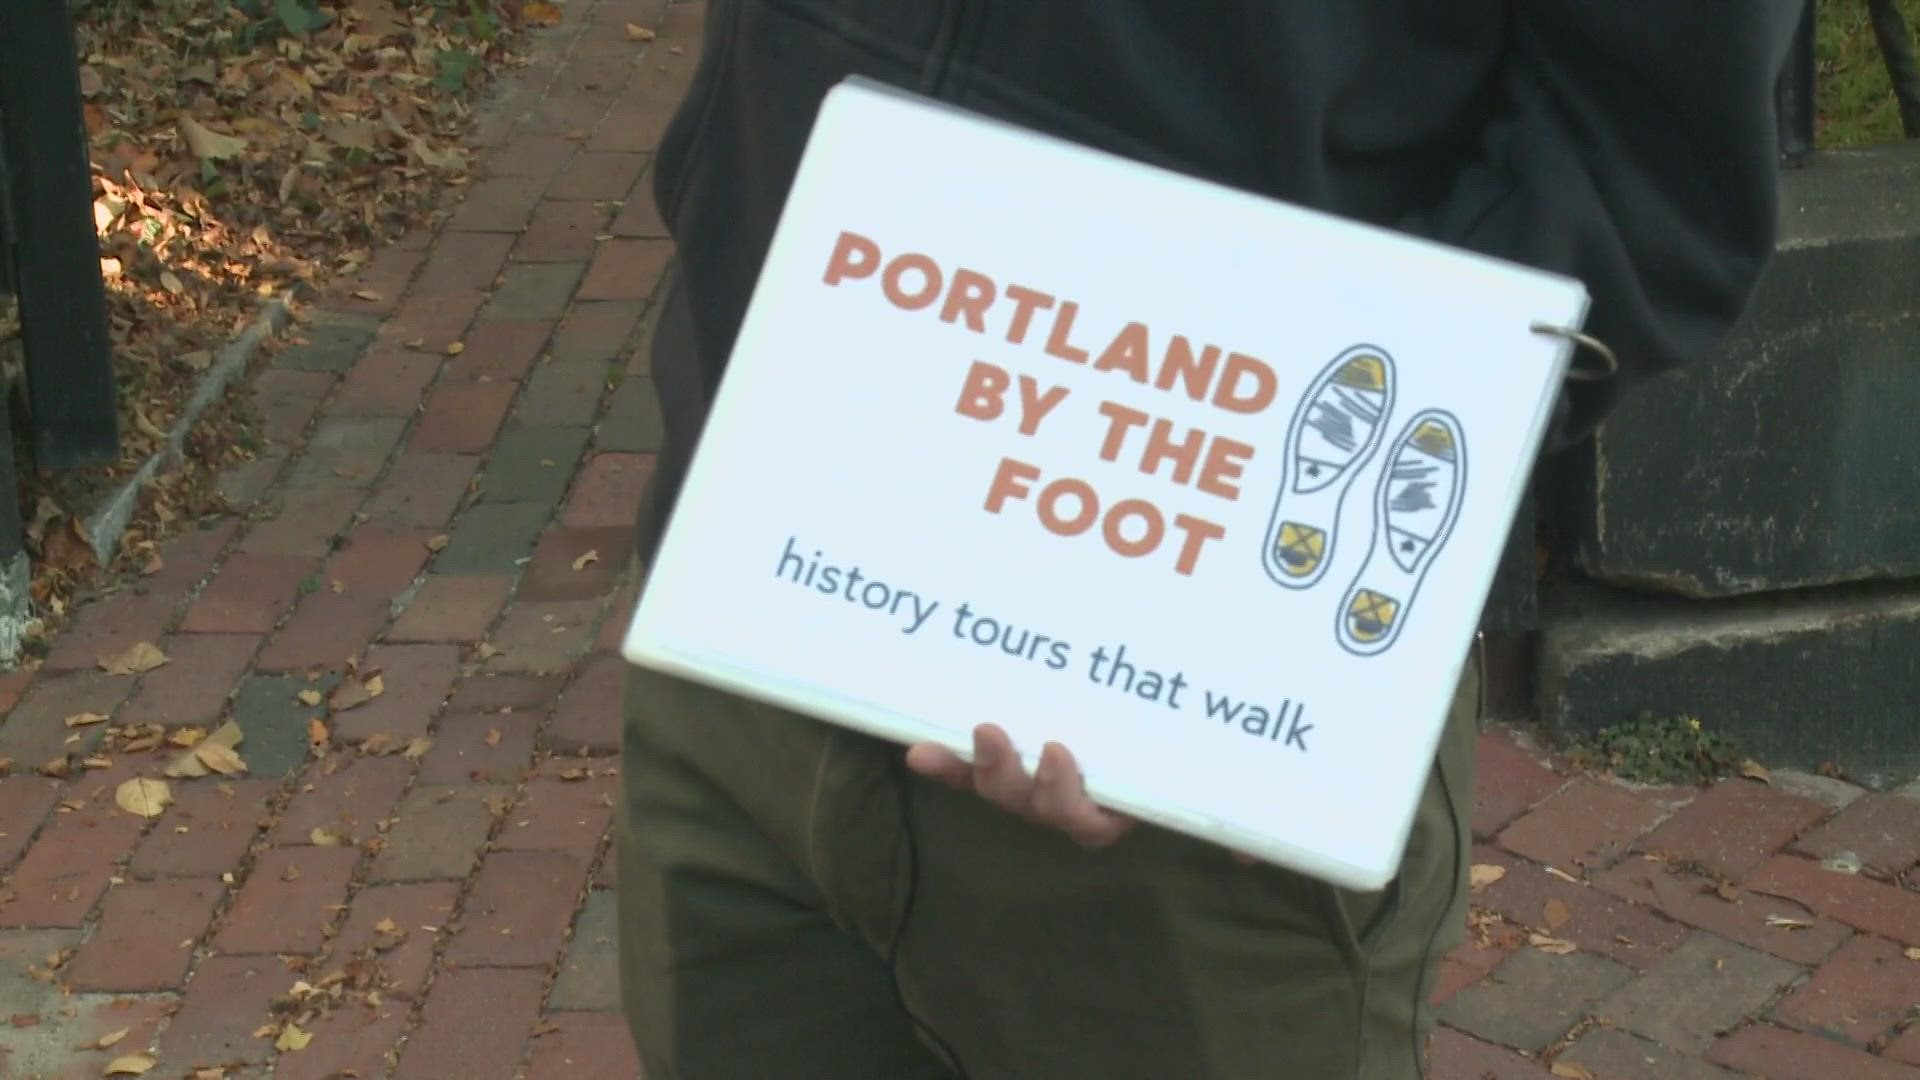 February is Black History Month, and there is a new tour in Portland that aims to highlight and educate people on the Black history of the city of Portland.